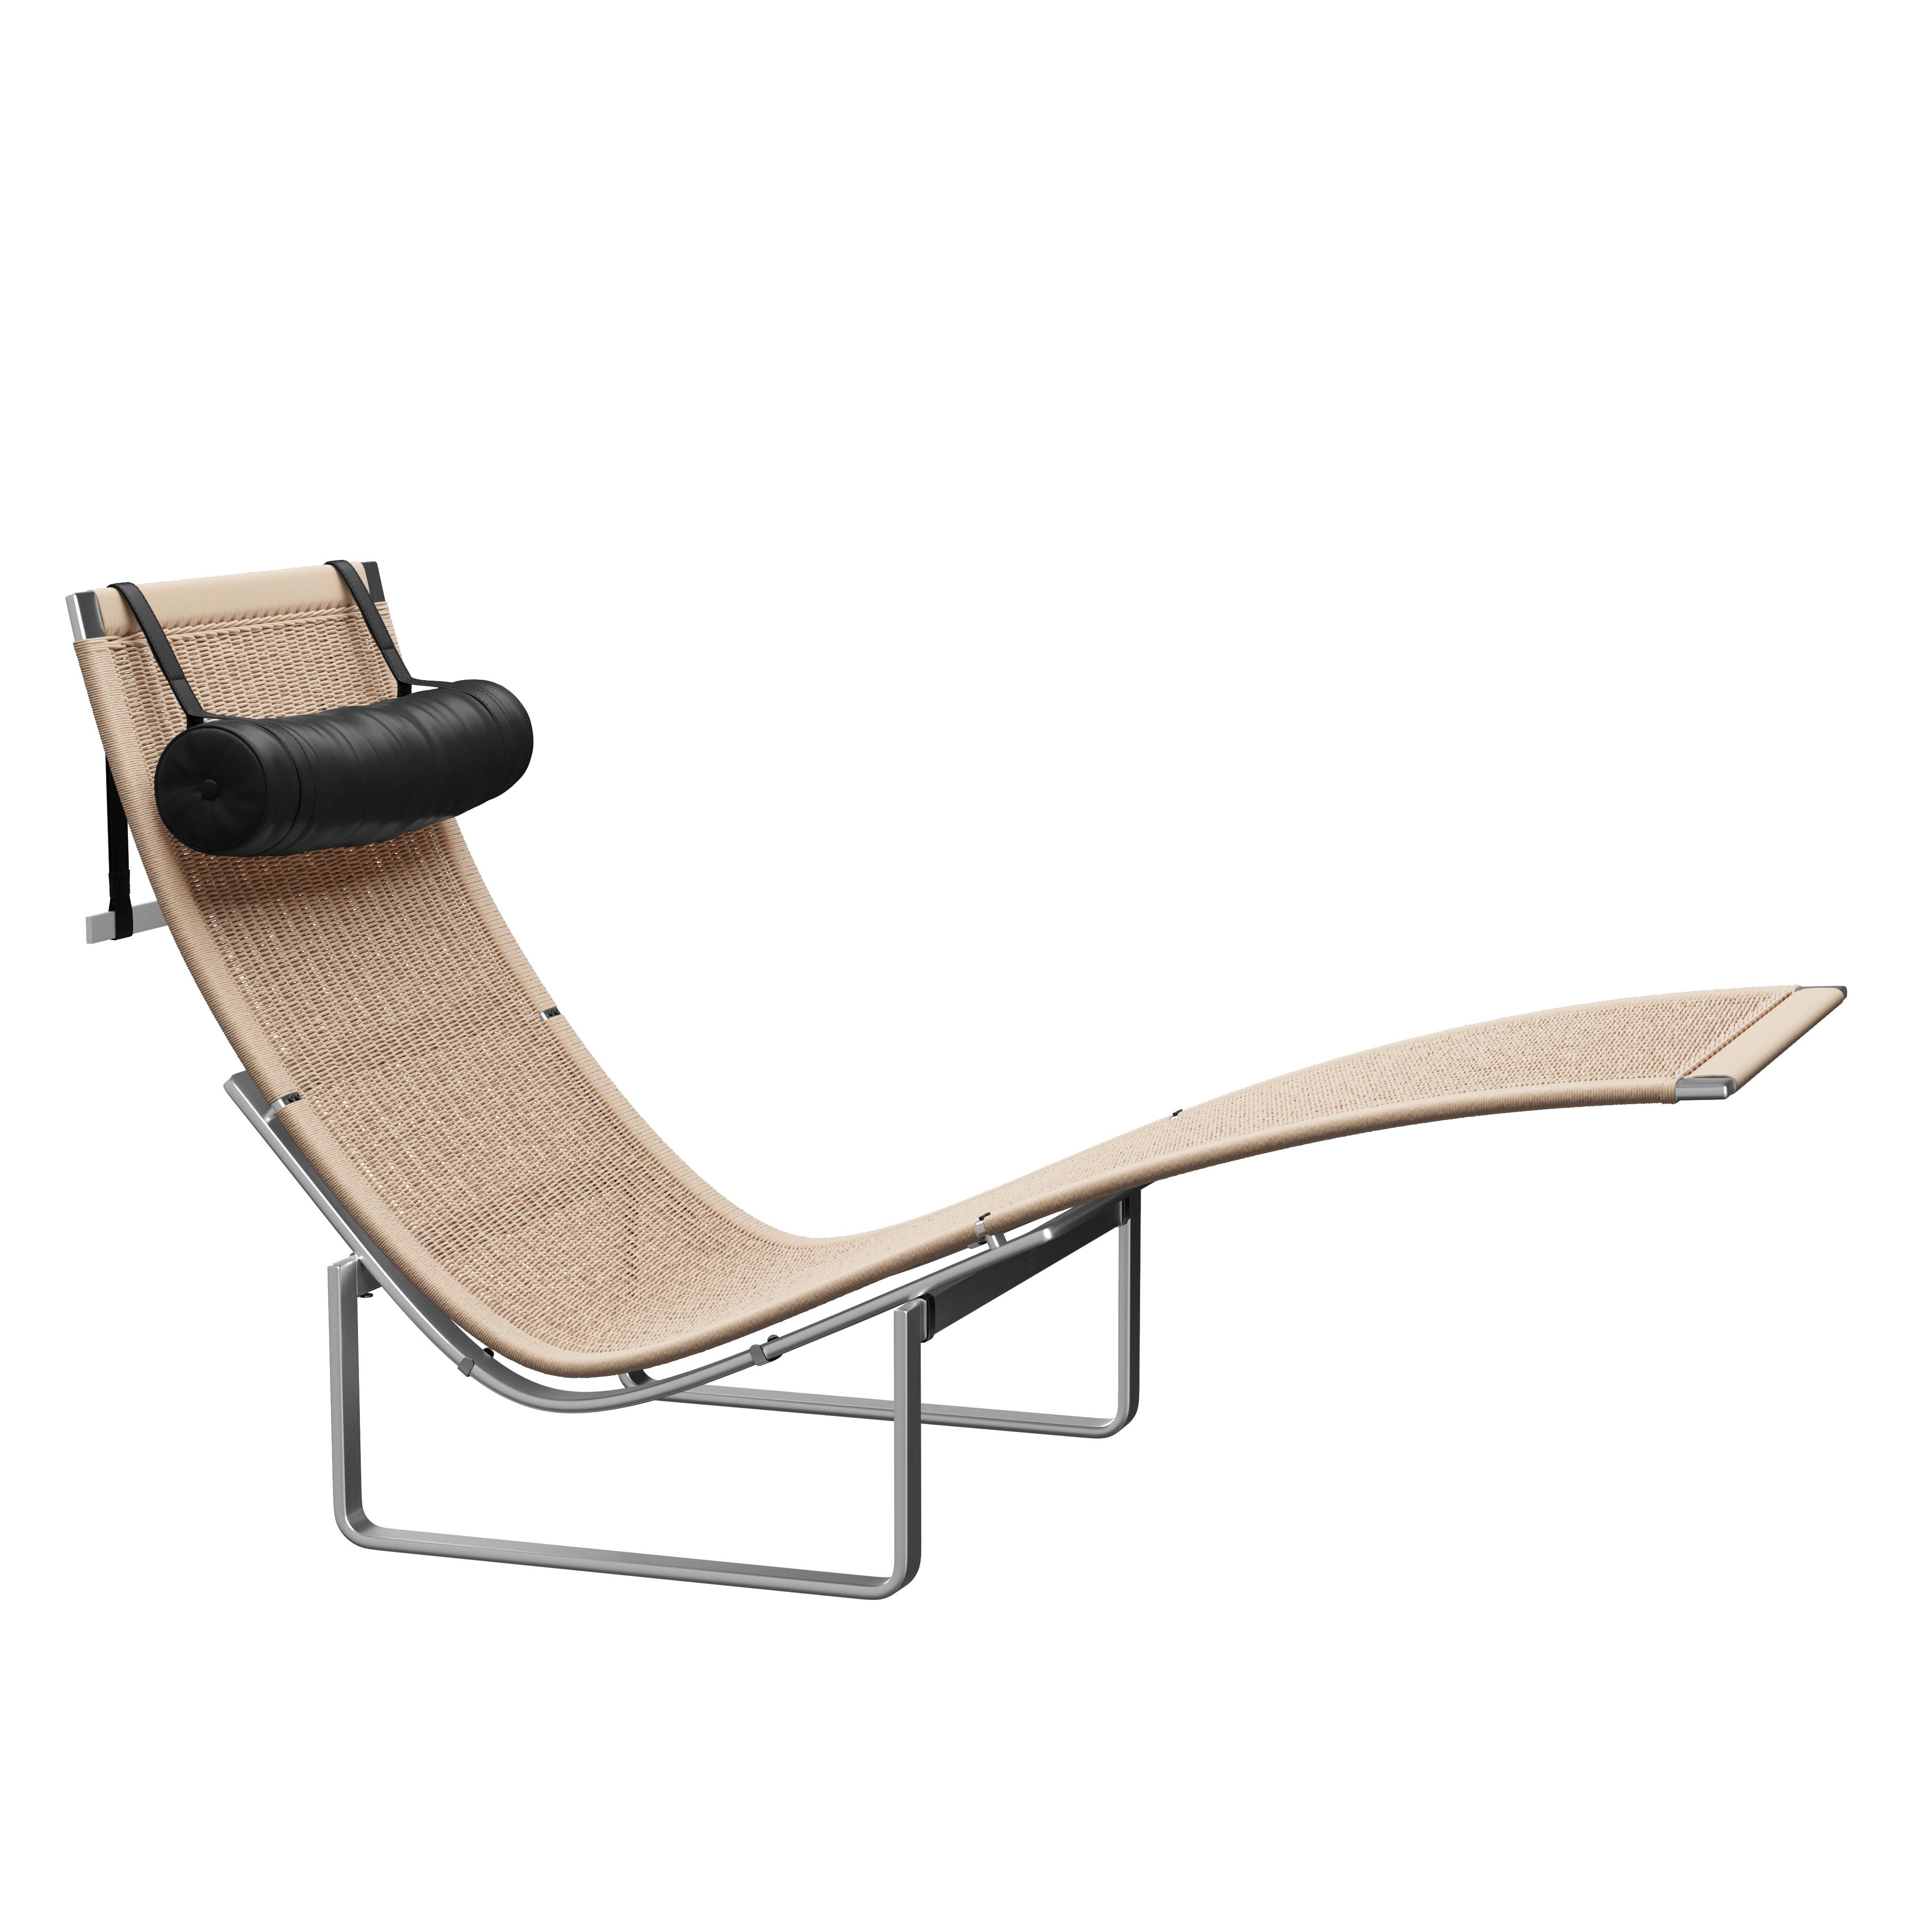 Poul Kjærholm 'PK24' Wicker Lounge Chair for Fritz Hansen with Leather Headrest In New Condition For Sale In Glendale, CA